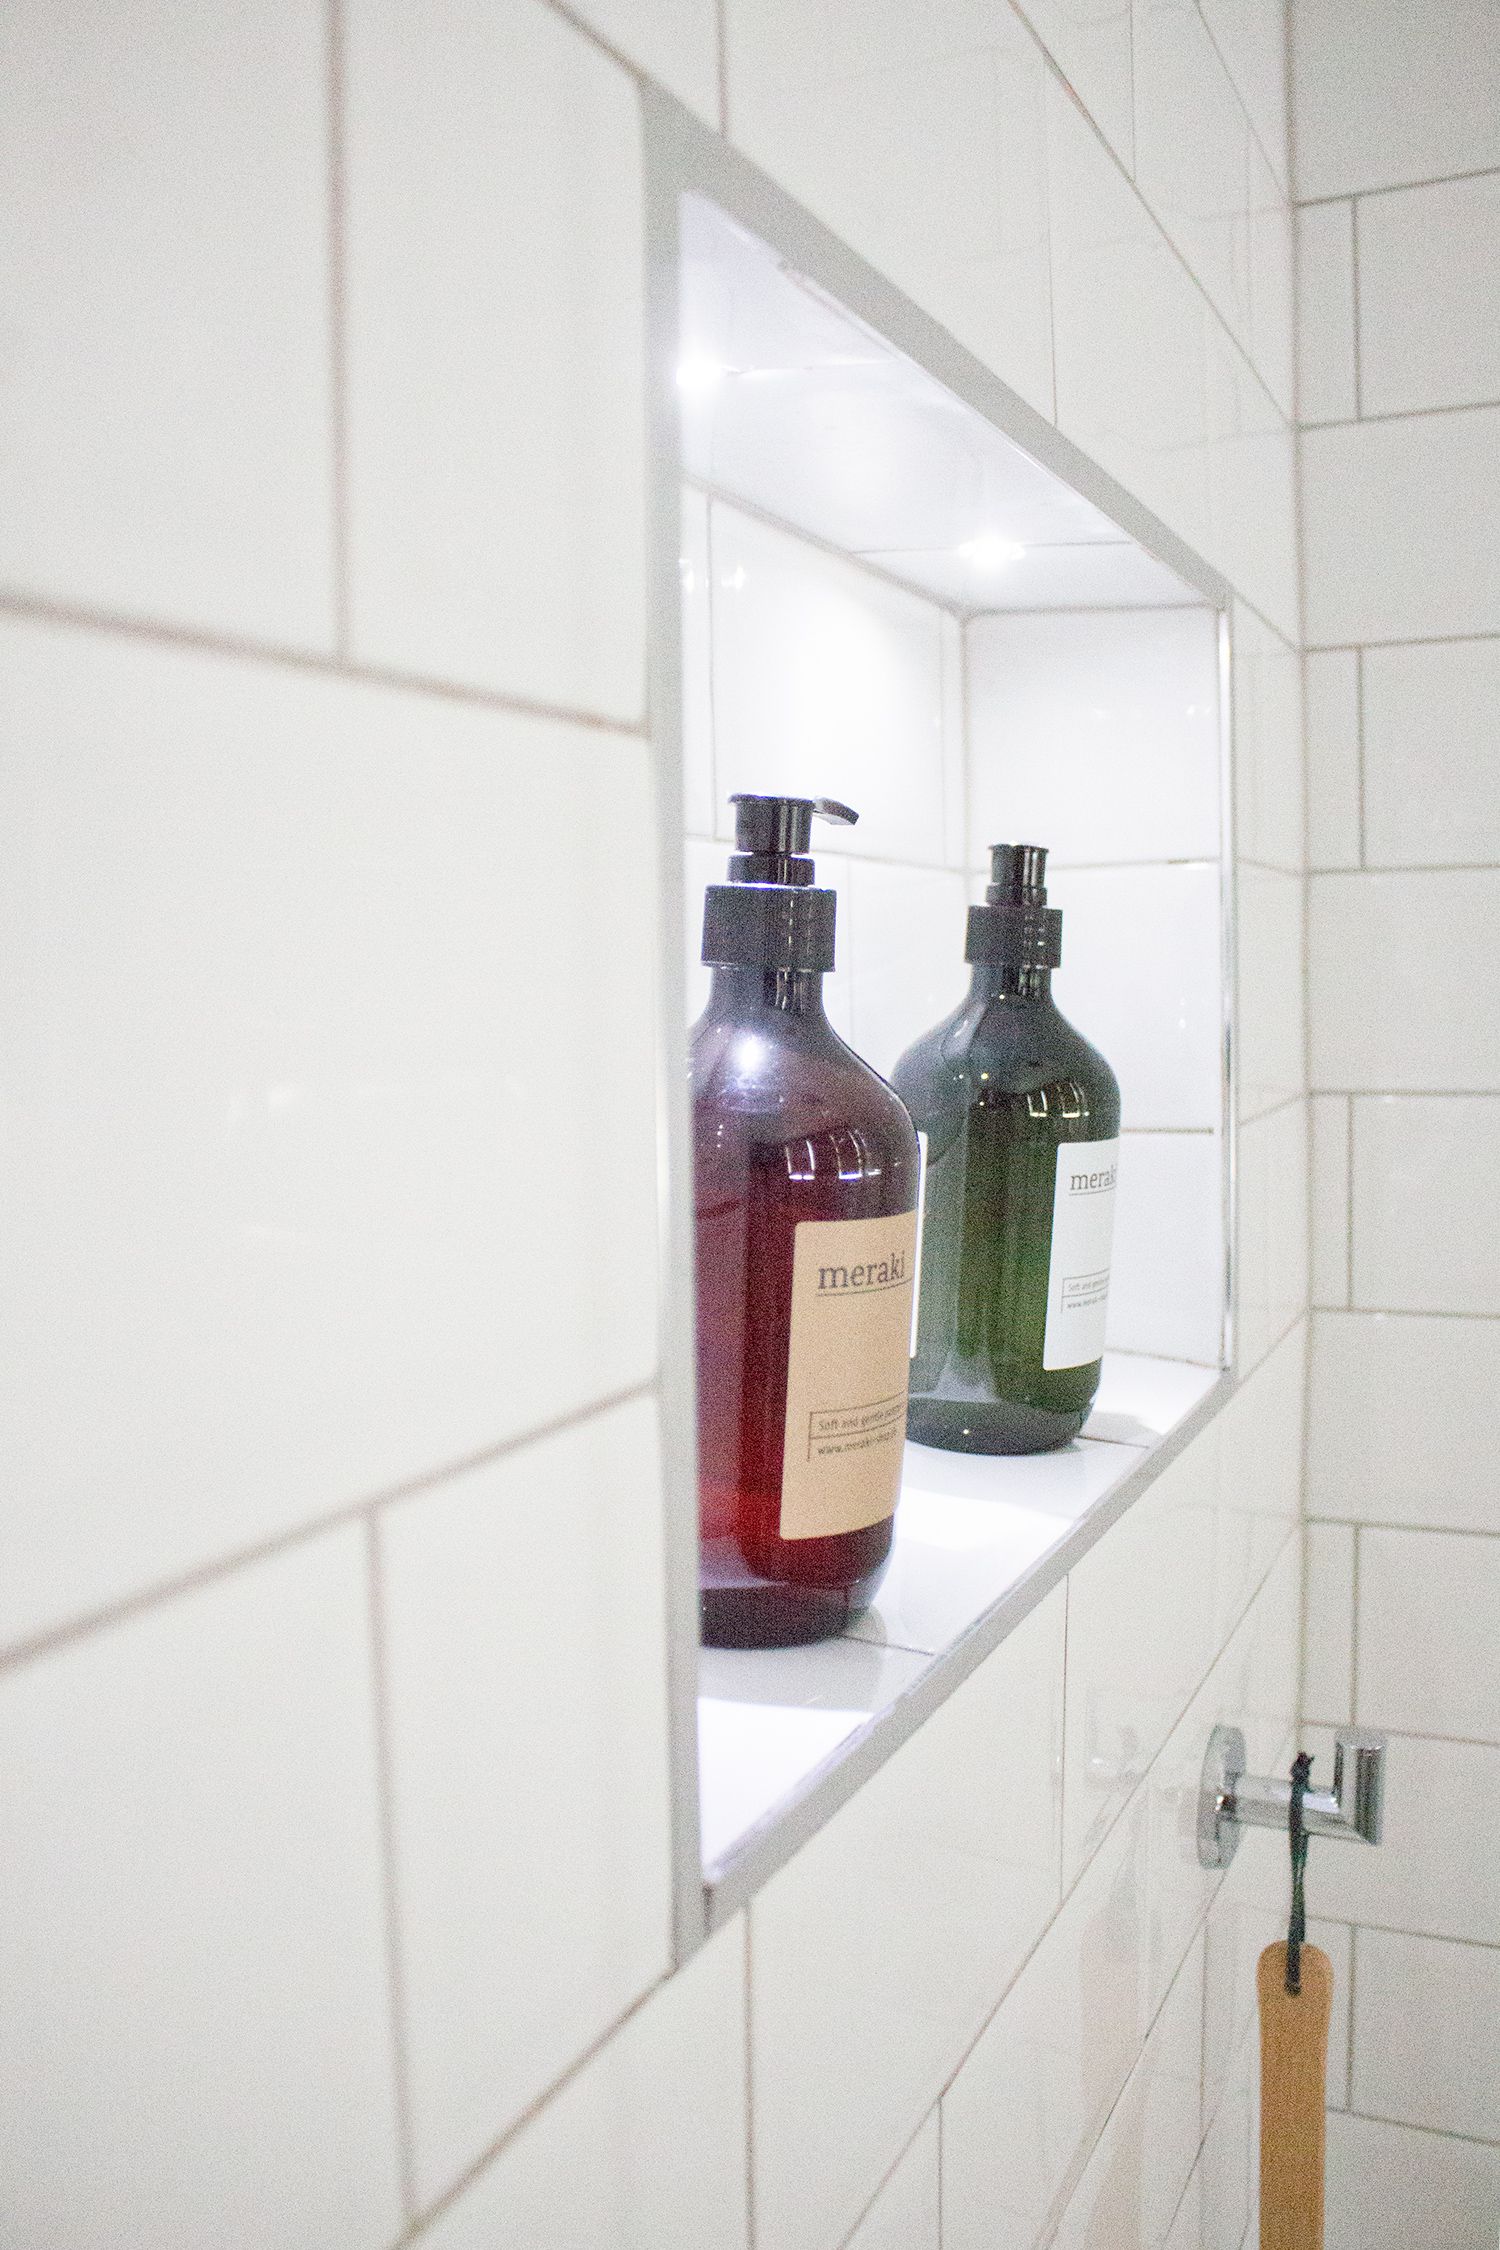 A close up of the shower niche with lighting inside, showing off the nice body wash bottles.